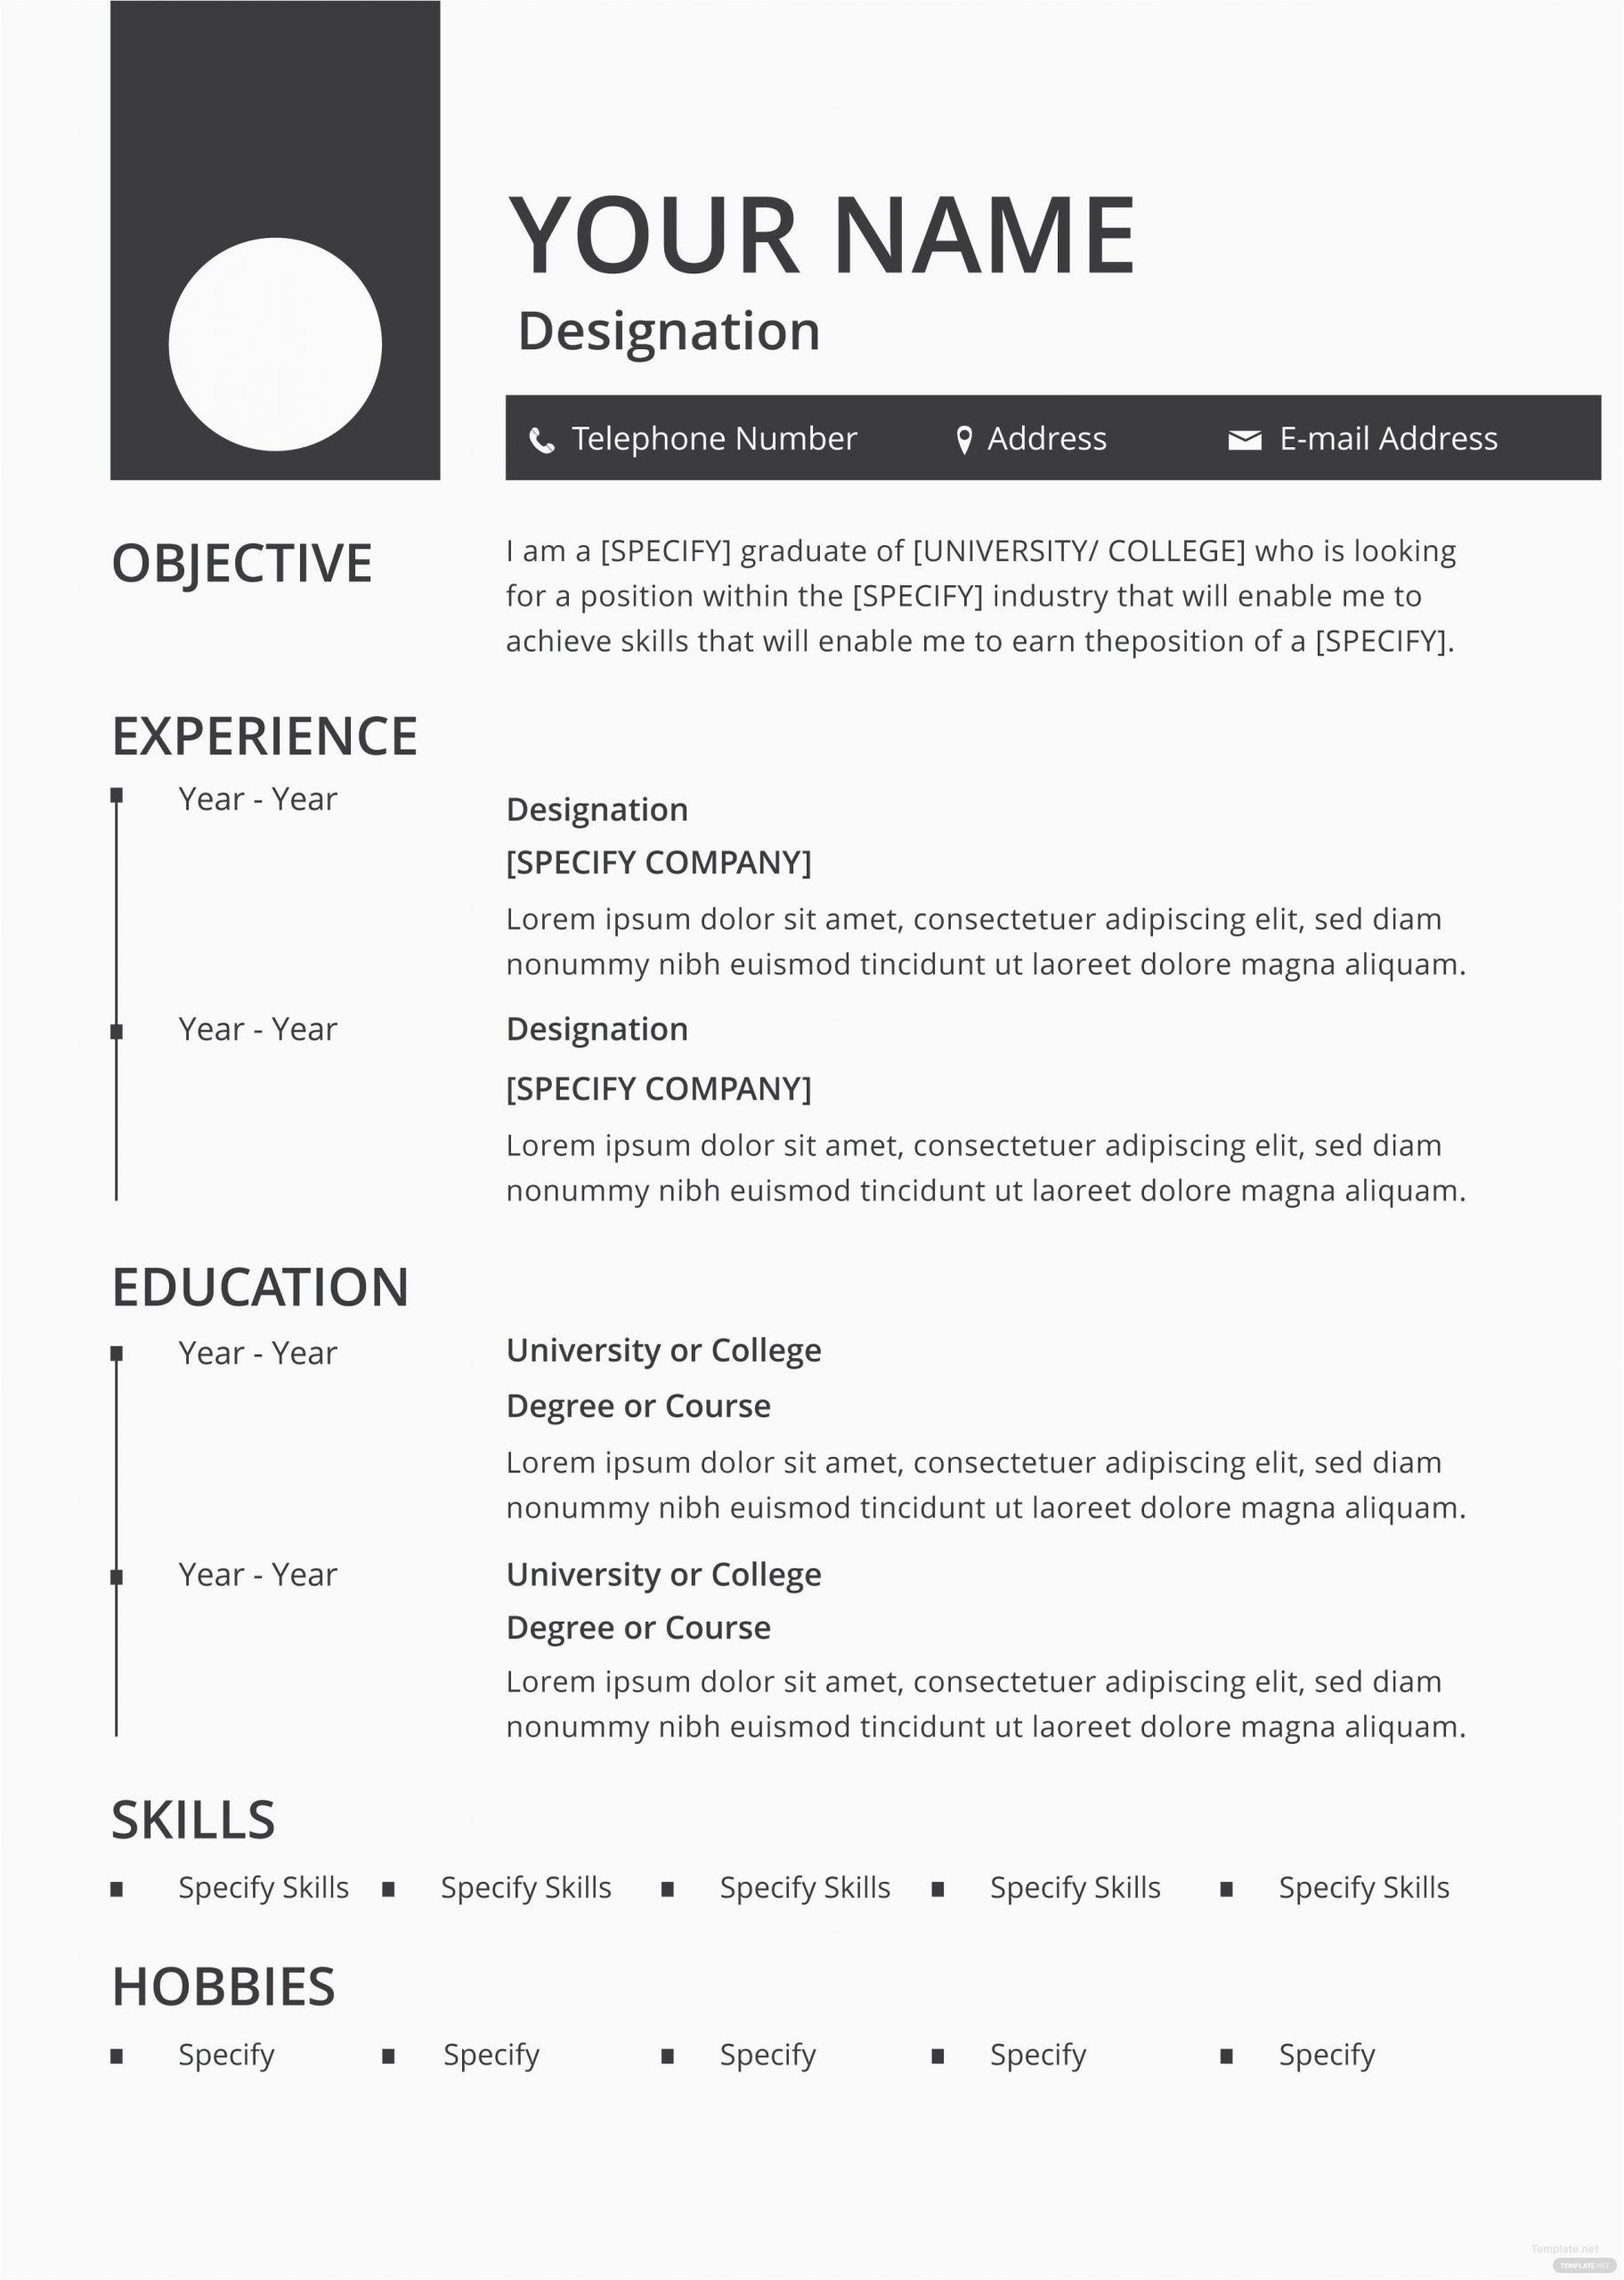 Blank Resume Templates for Free to Fill In Free Blank Resume and Cv Template In Adobe Shop